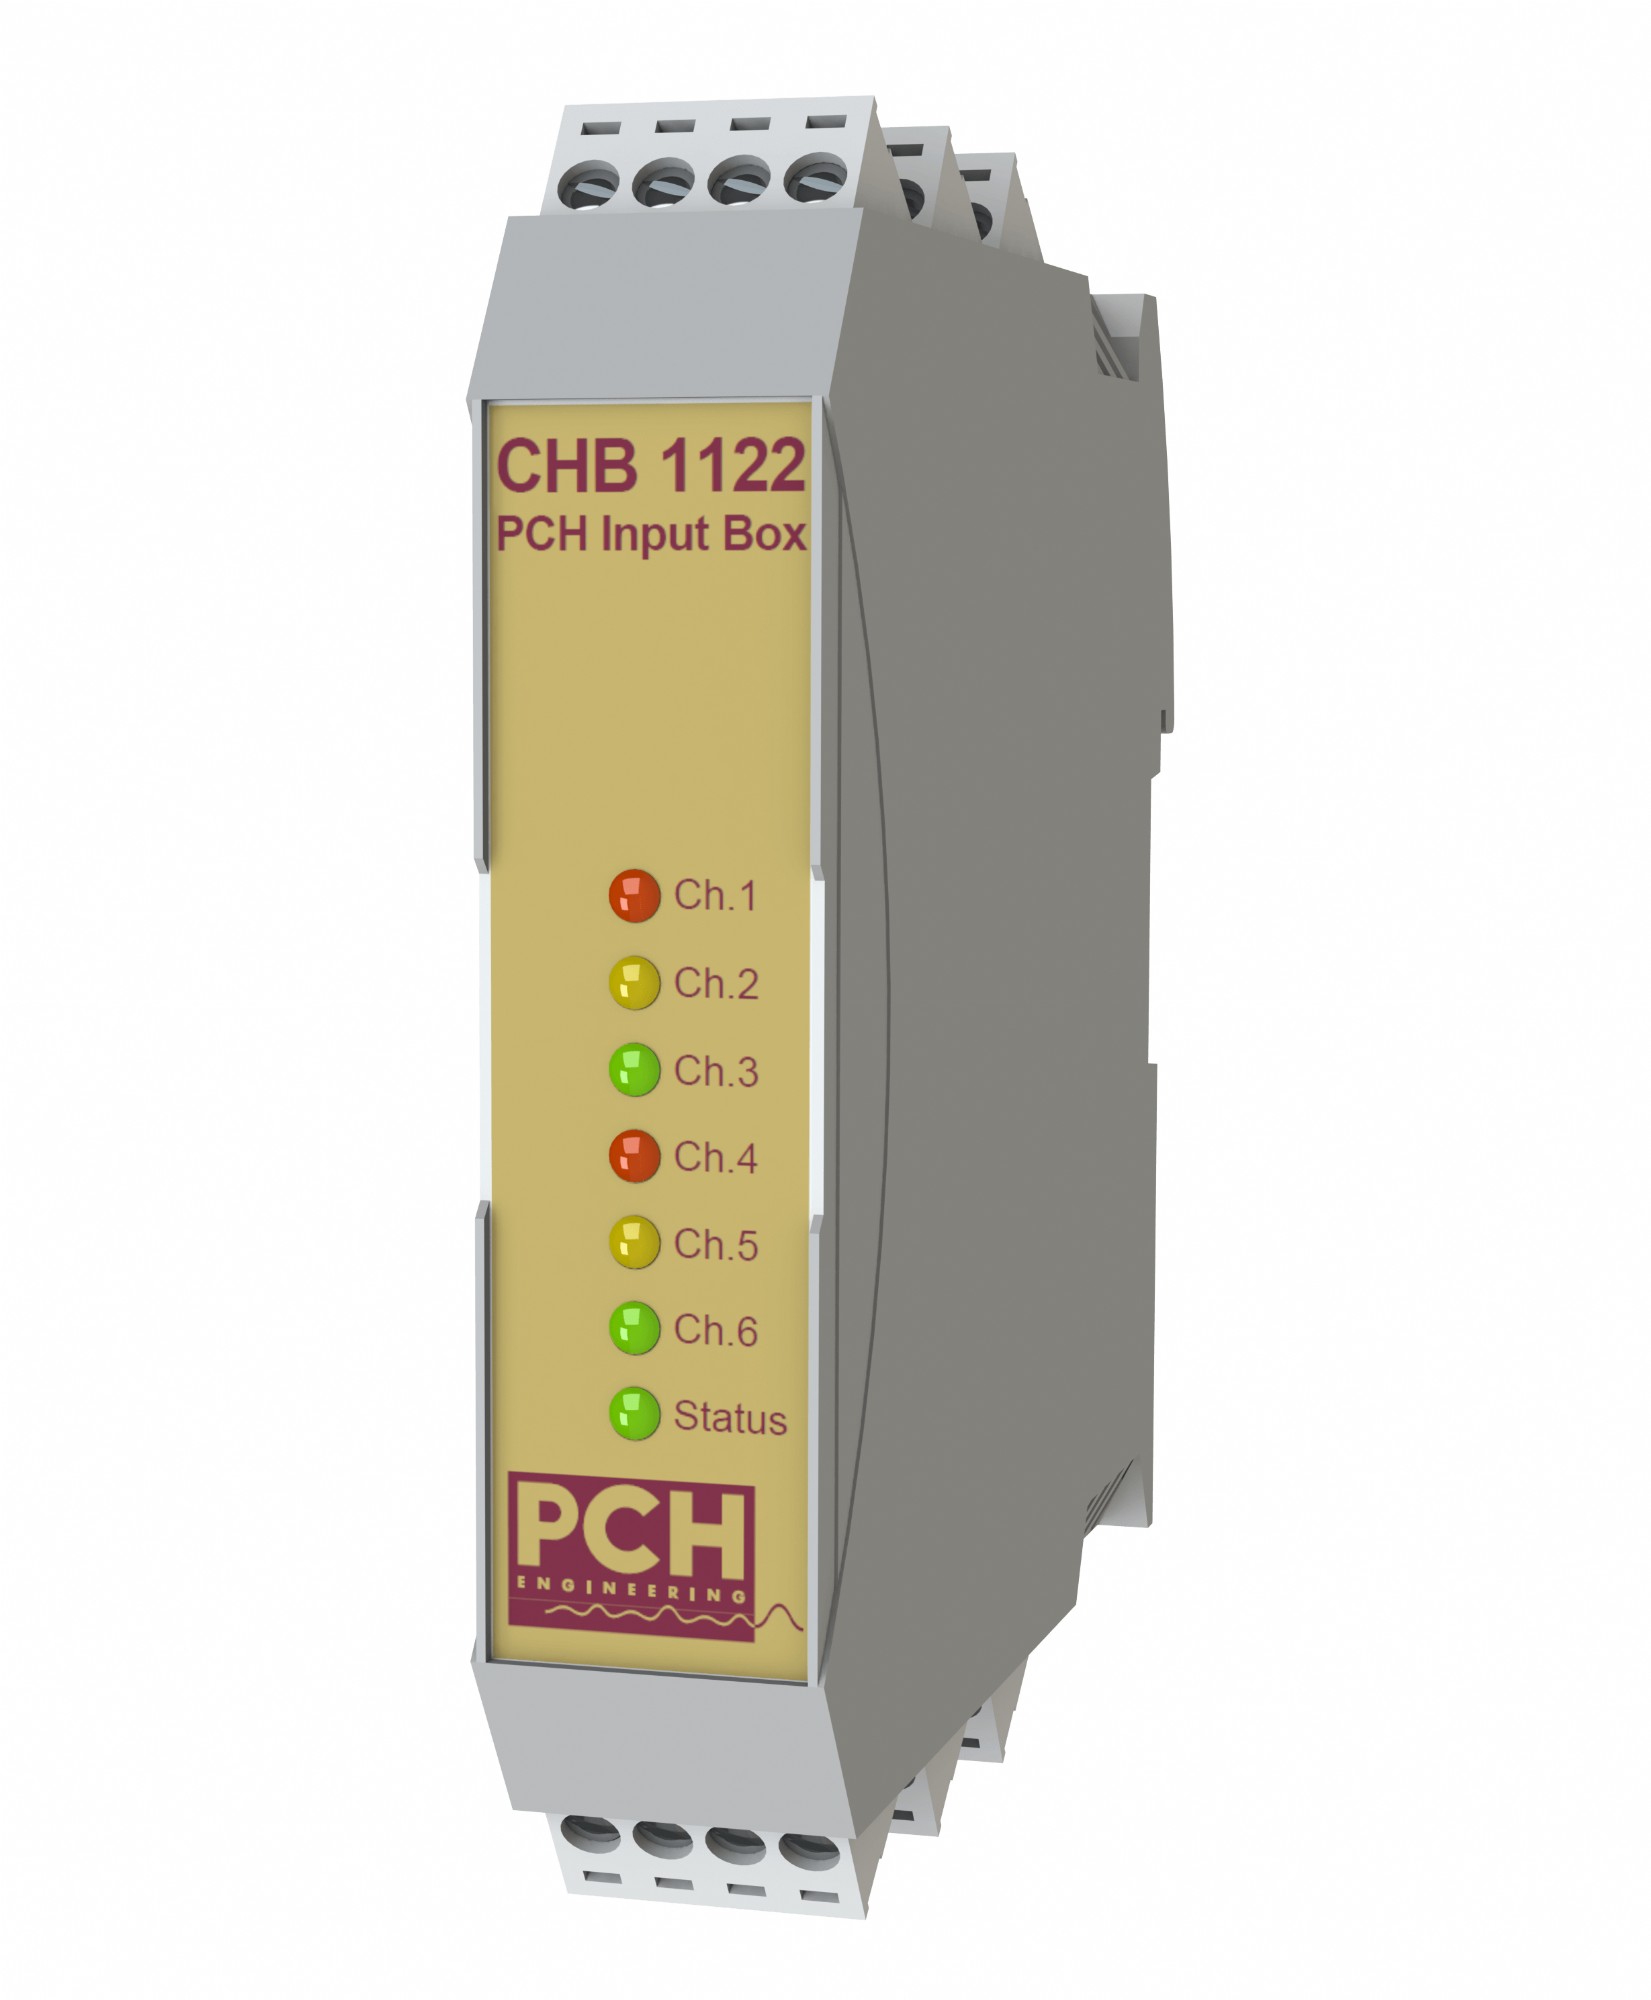 The PCH Engineering Input Box module.